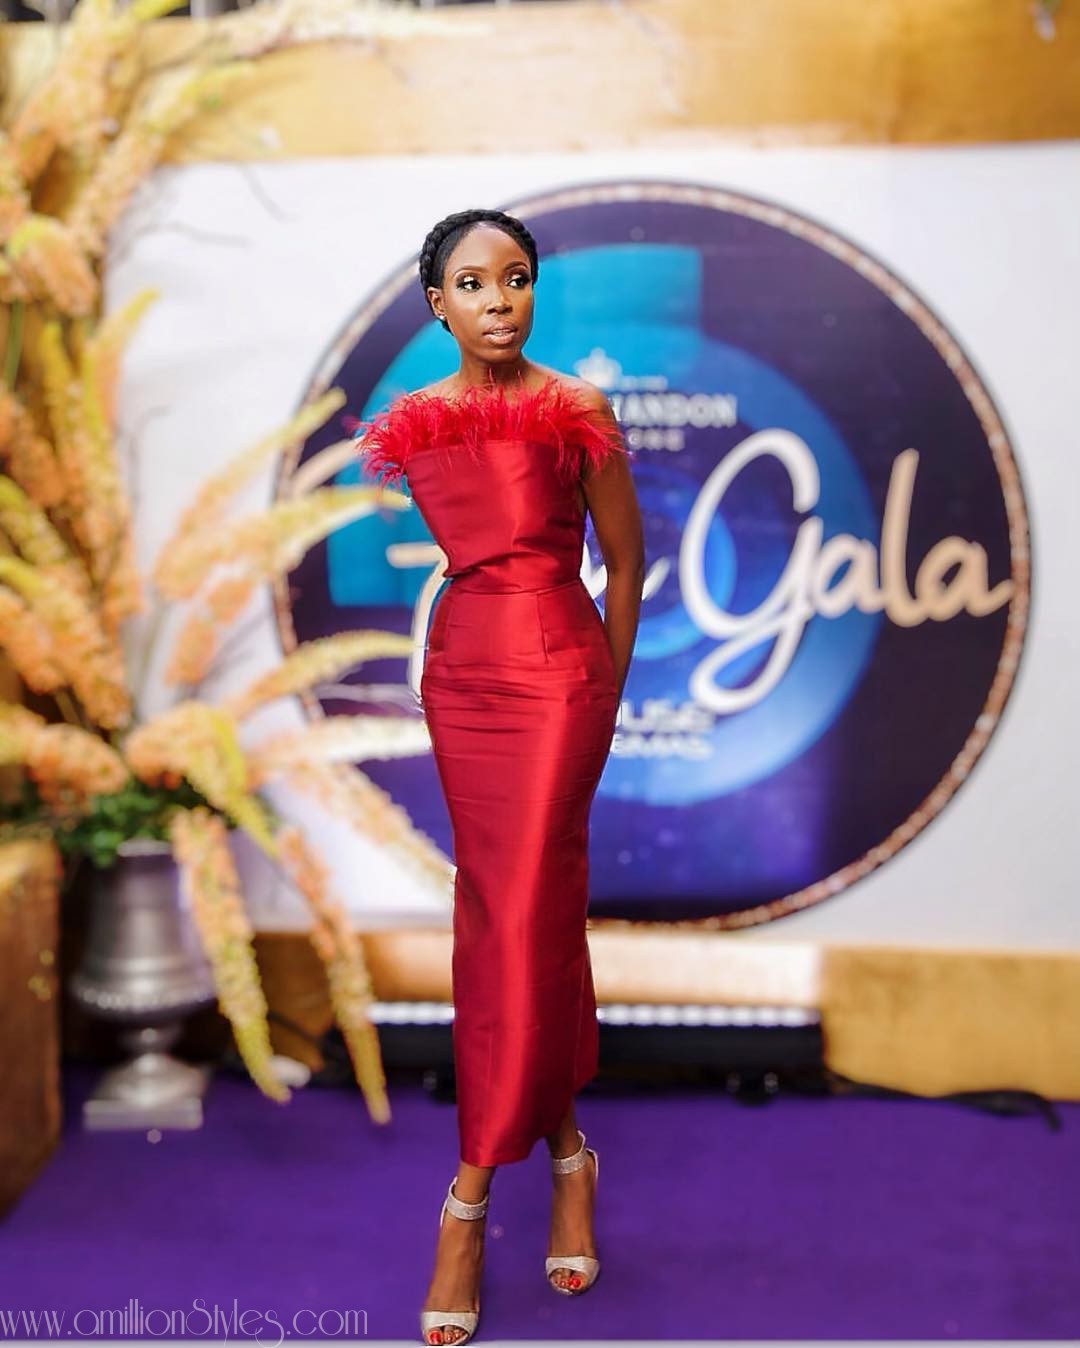 First Ever Film Gala Had A Fashionable Turnout By Celebrities